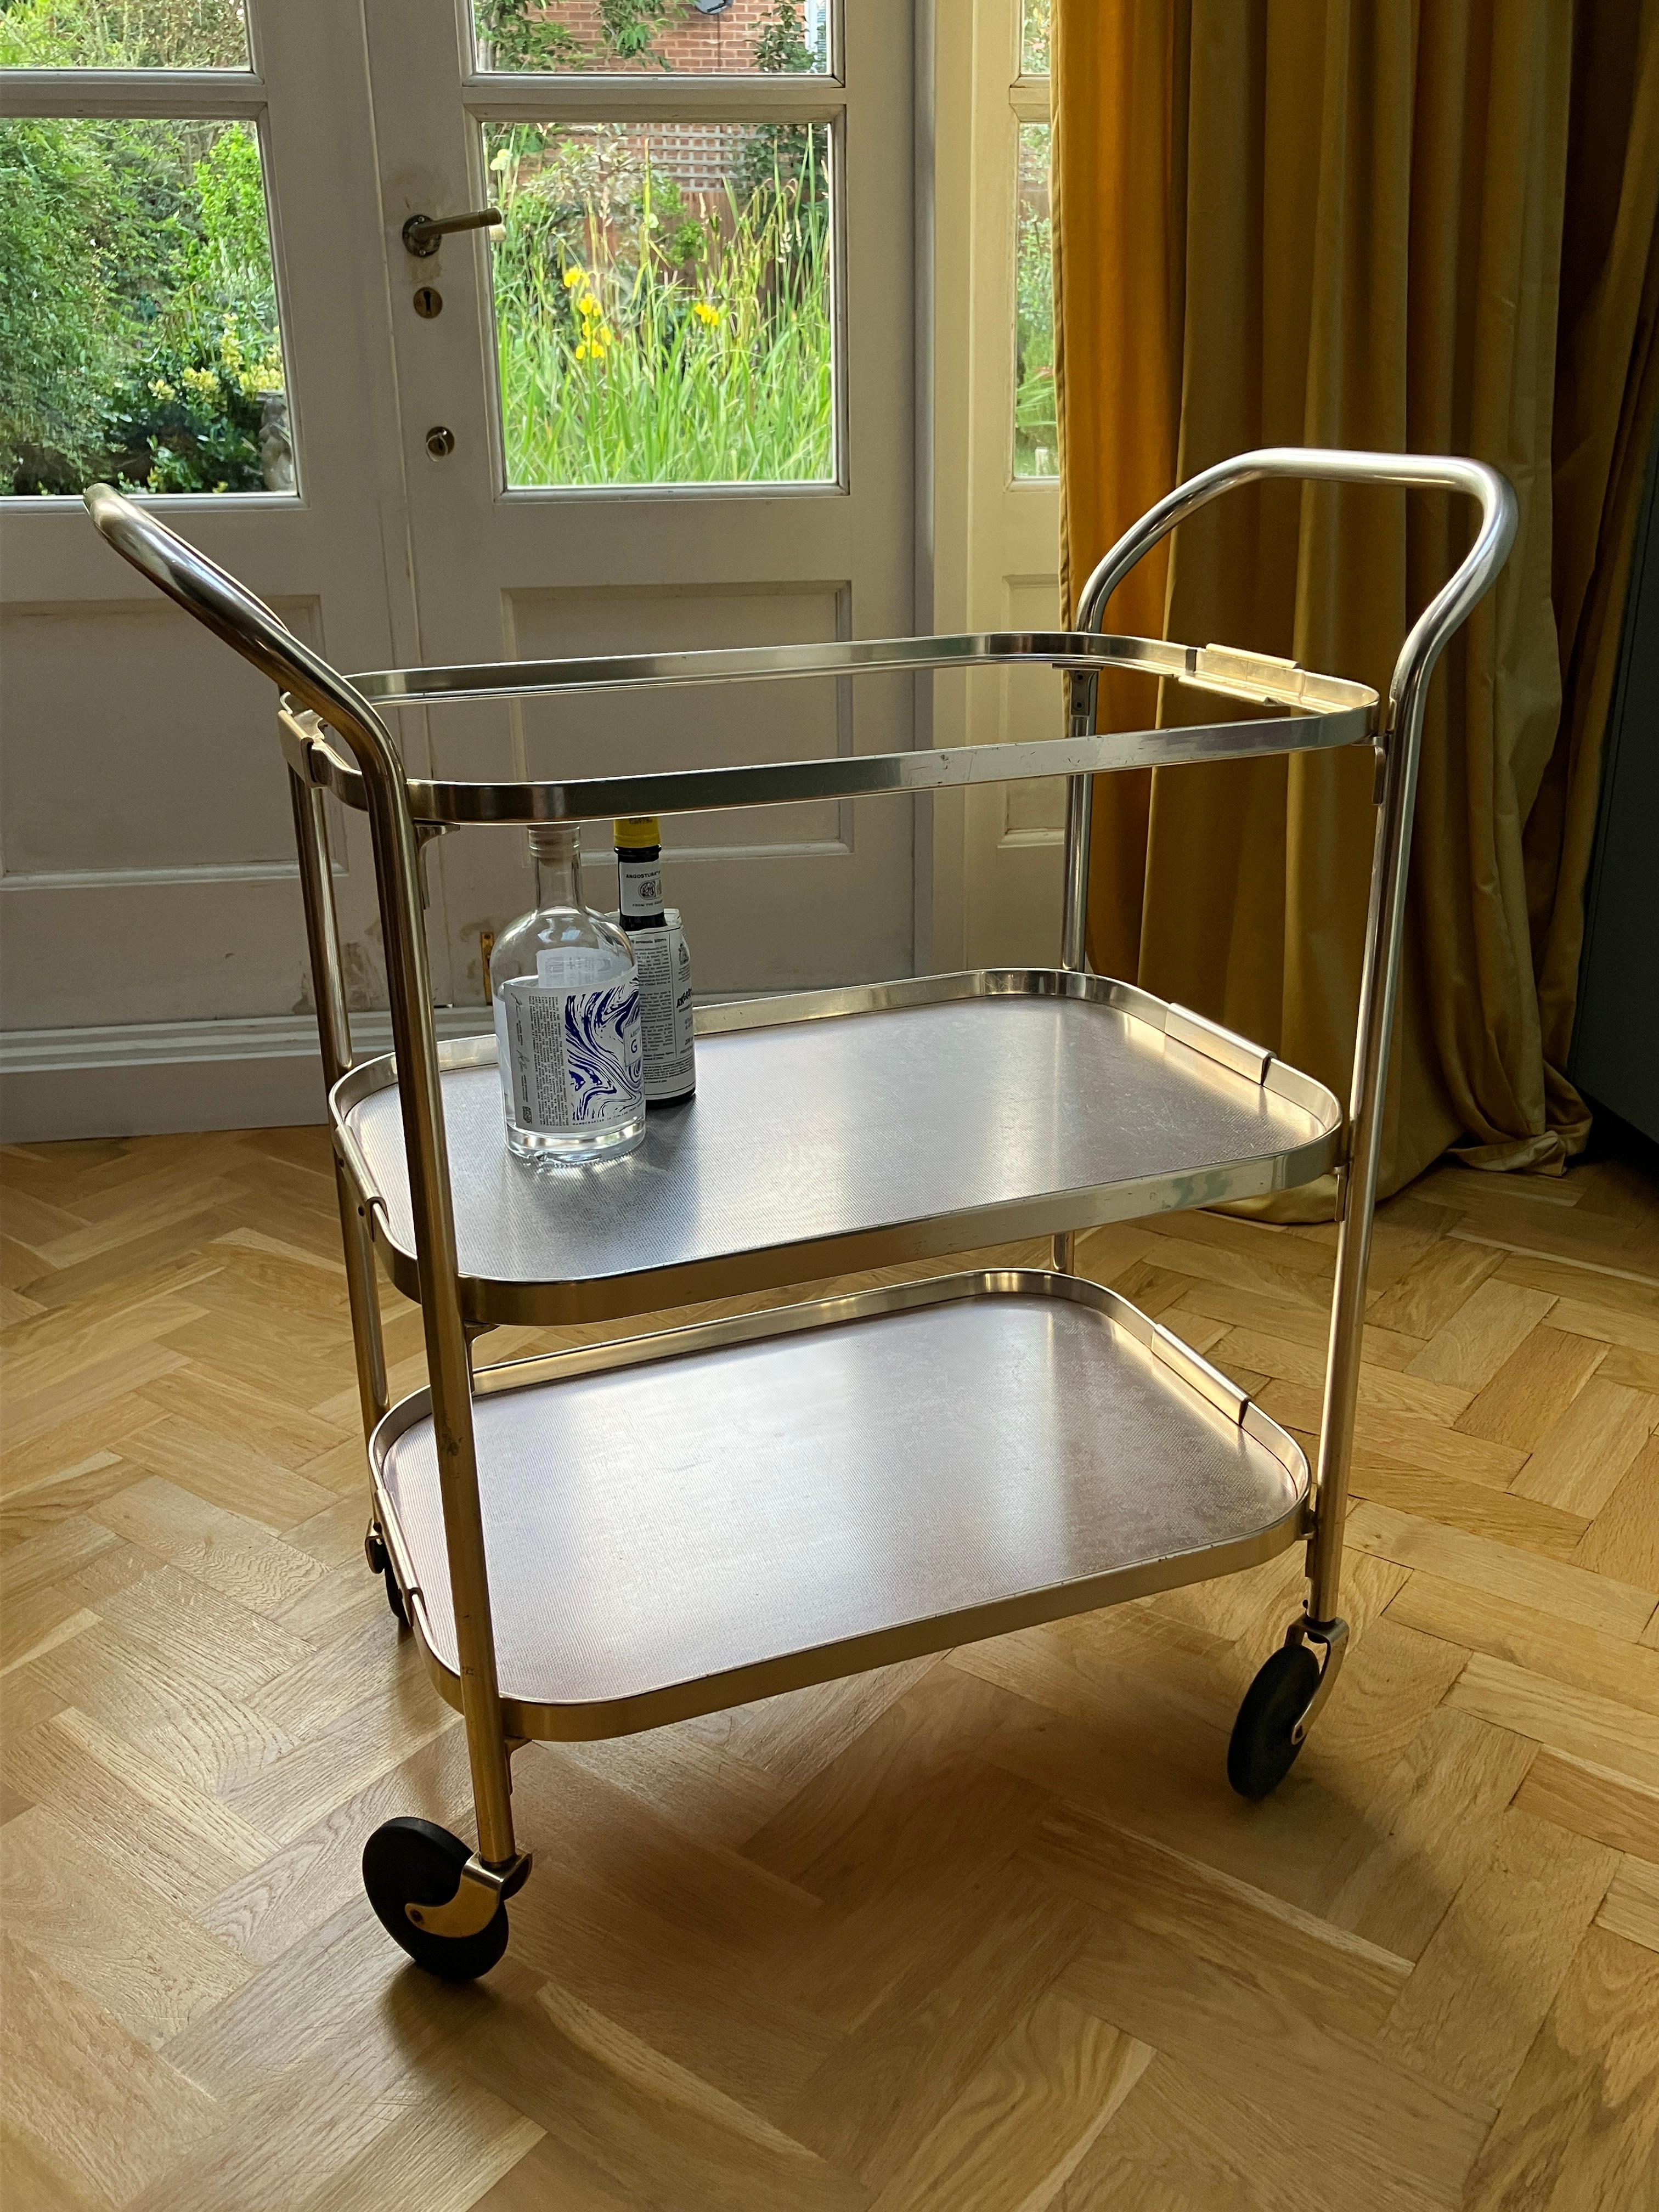 Anodized 1970s English Aluminium Drinks Trolley Cocktail Cabinet in Rose Gold by Kaymet